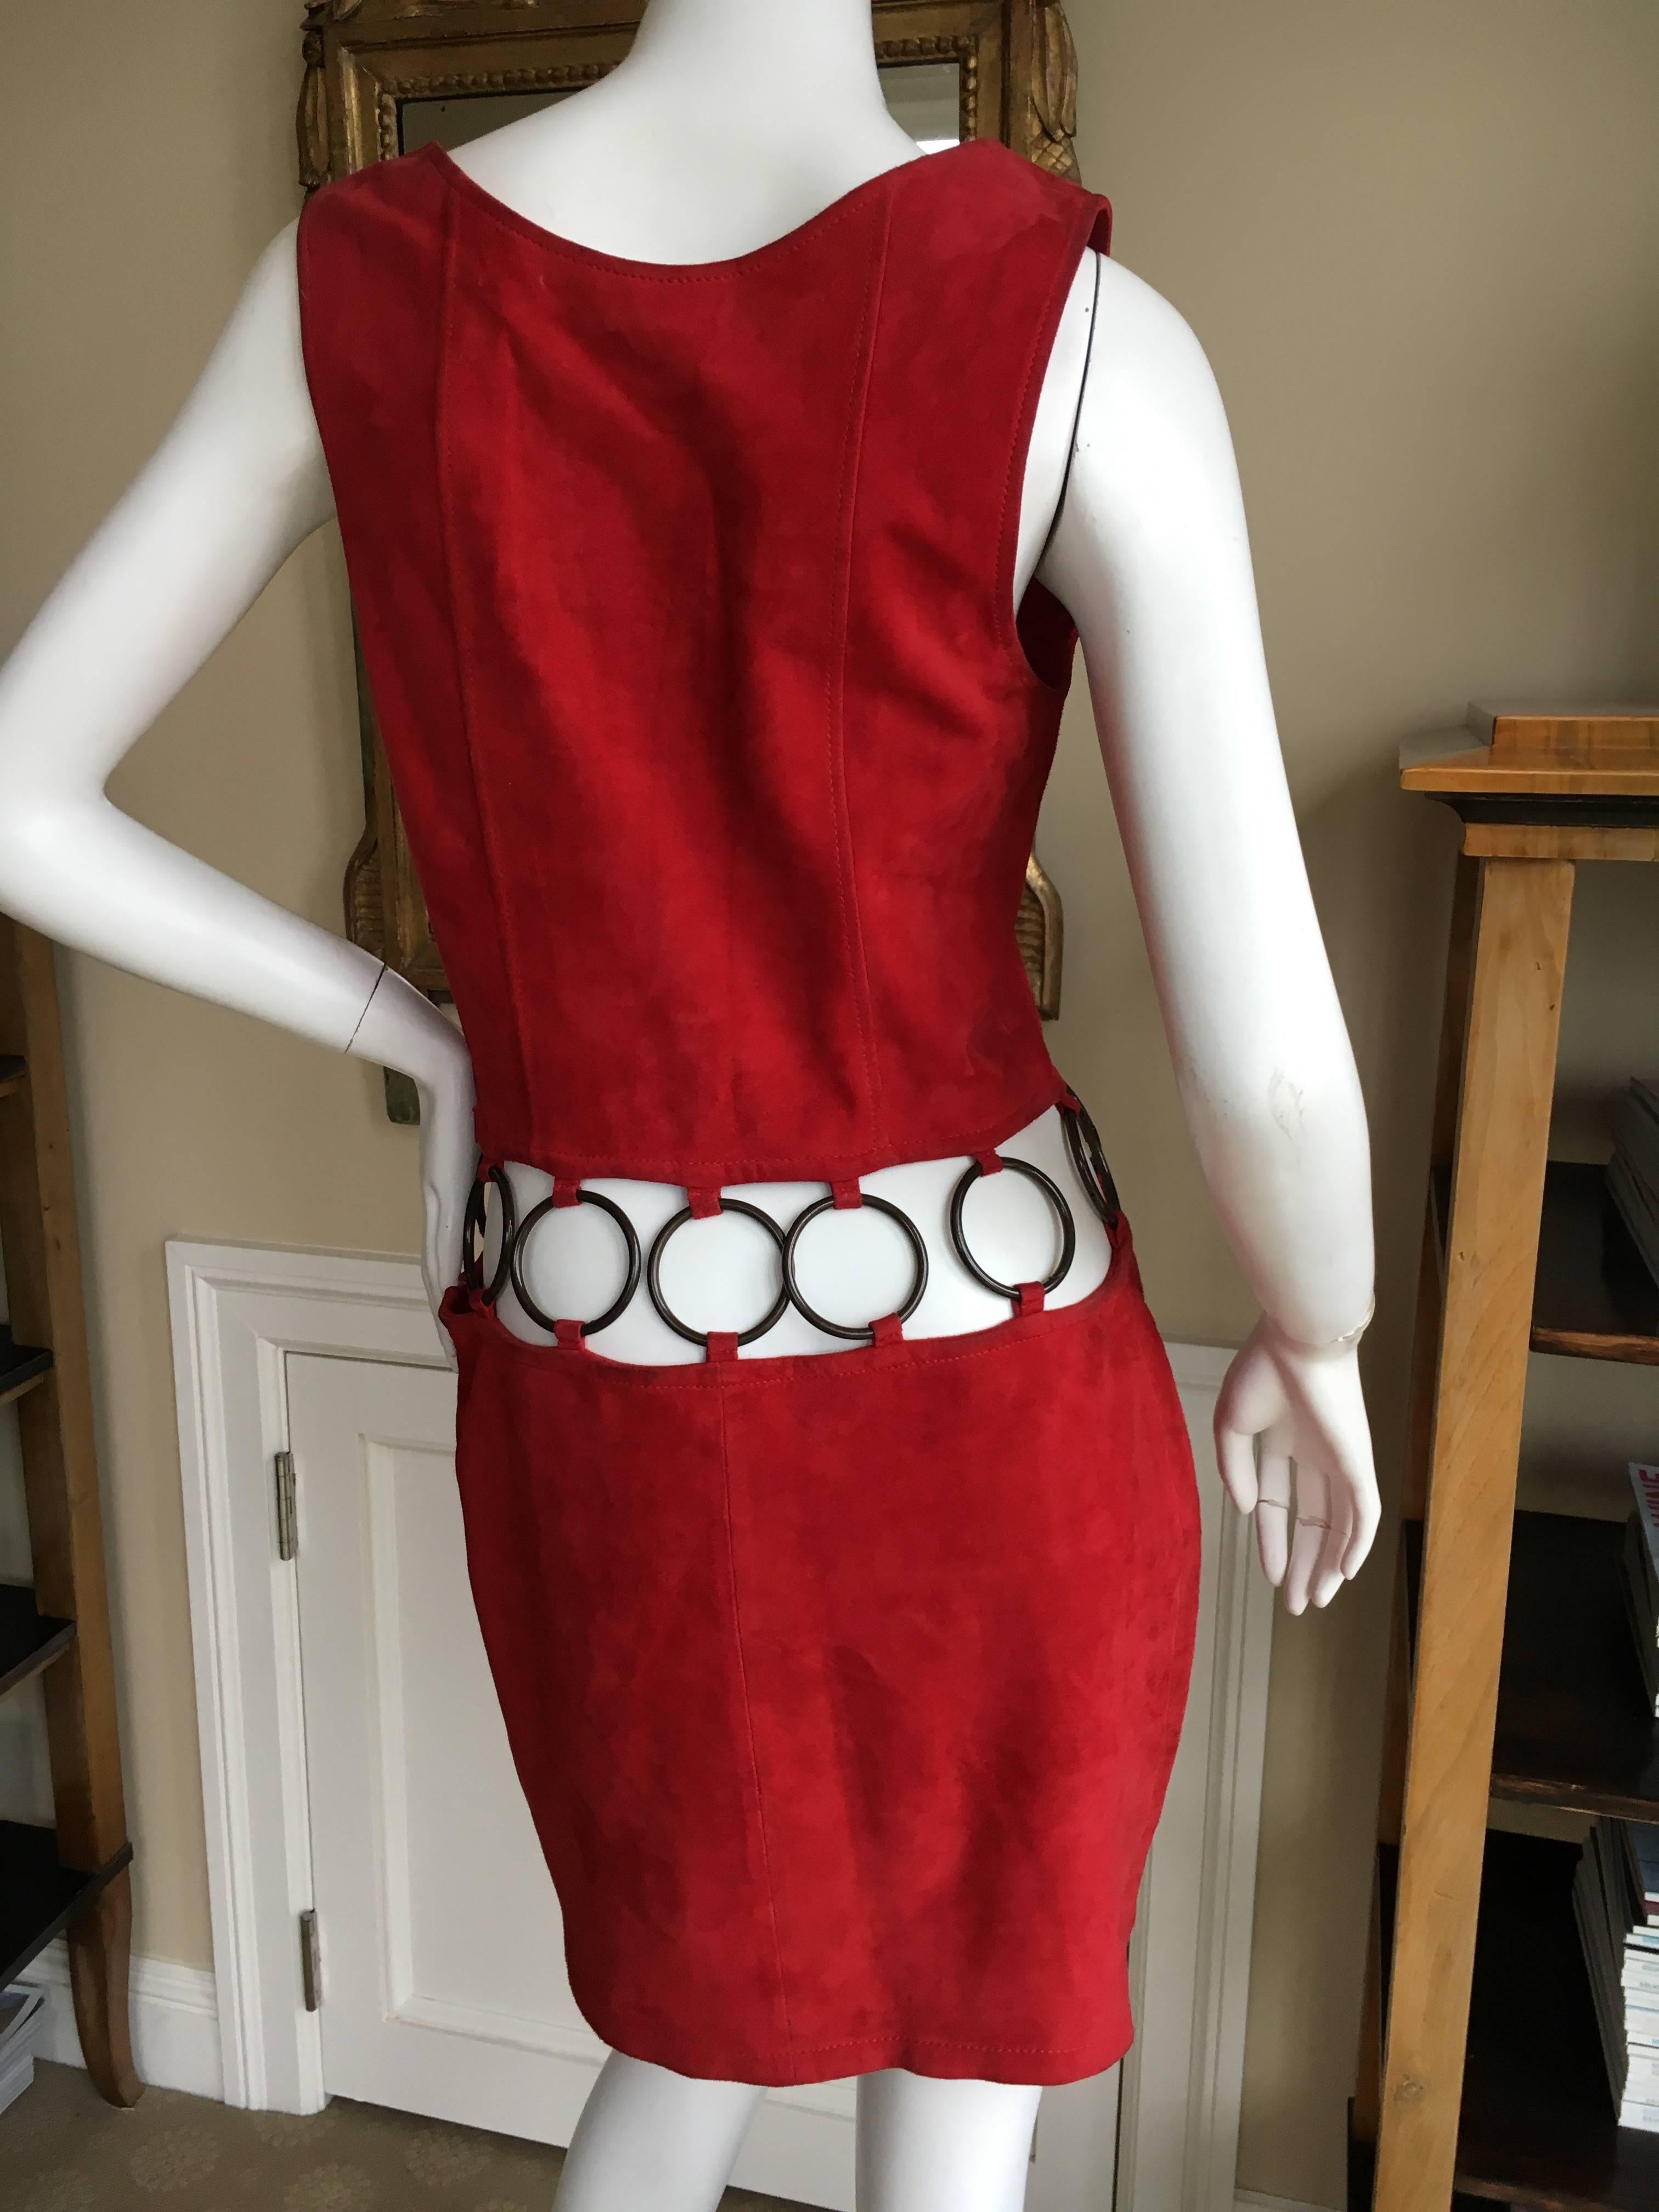 Yves Saint Laurent Swinging Seventies Suede Go Go Dress.
Red suede with large gunmetal O rings.
Size 40
Bust 36